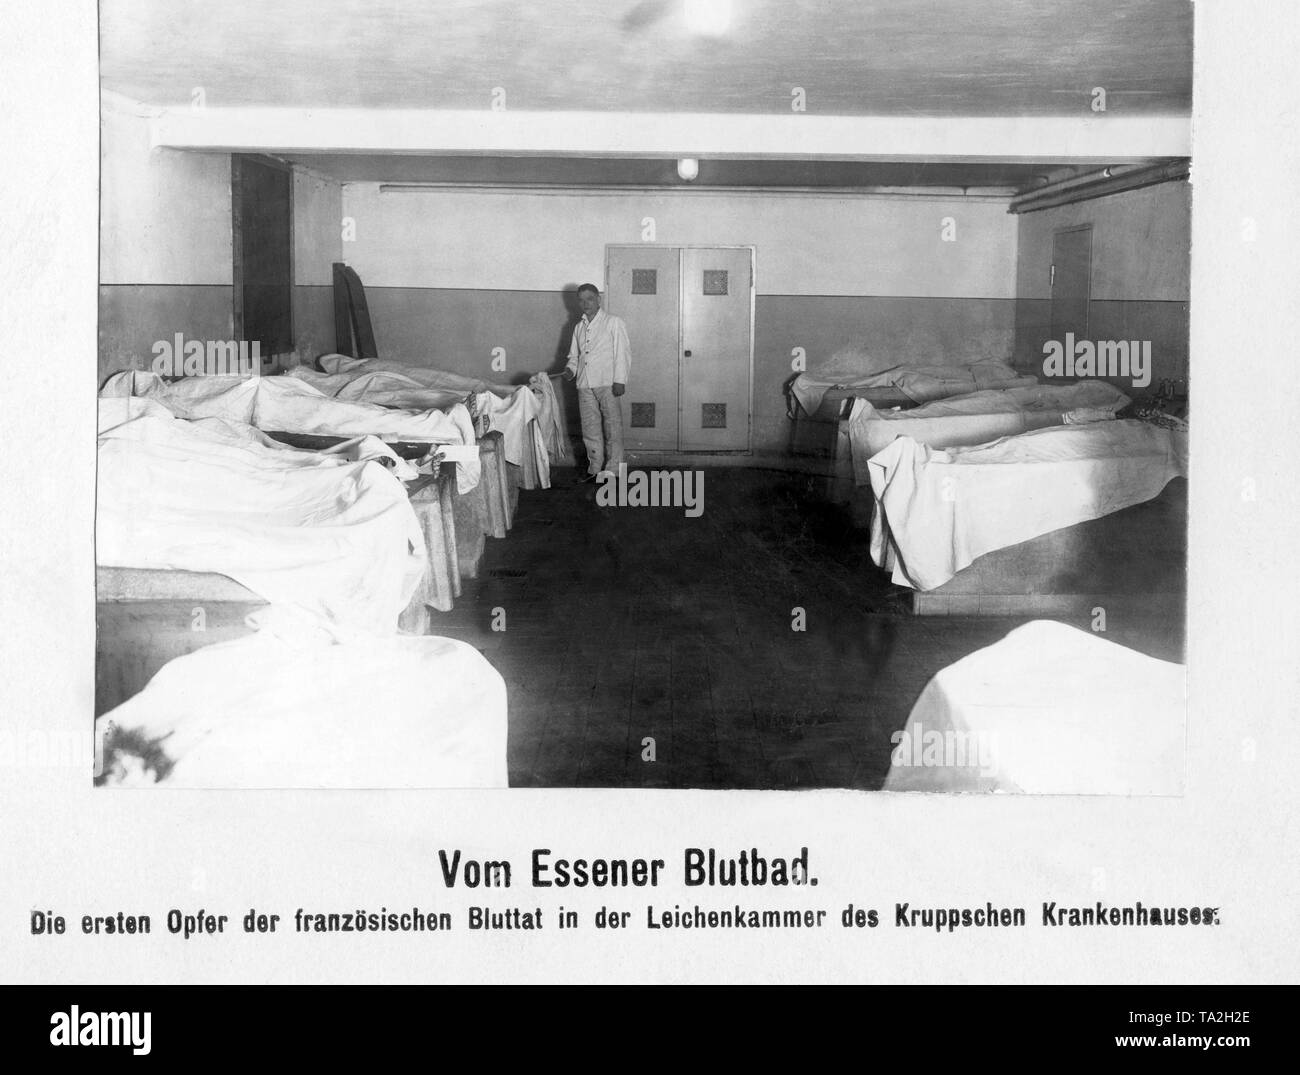 After the French occupation soldiers had shot several Krupp employees, the corpses of the so-called blood sacrifice were laid out covered with cloths in the morgue on the site of the Krupp company. Stock Photo